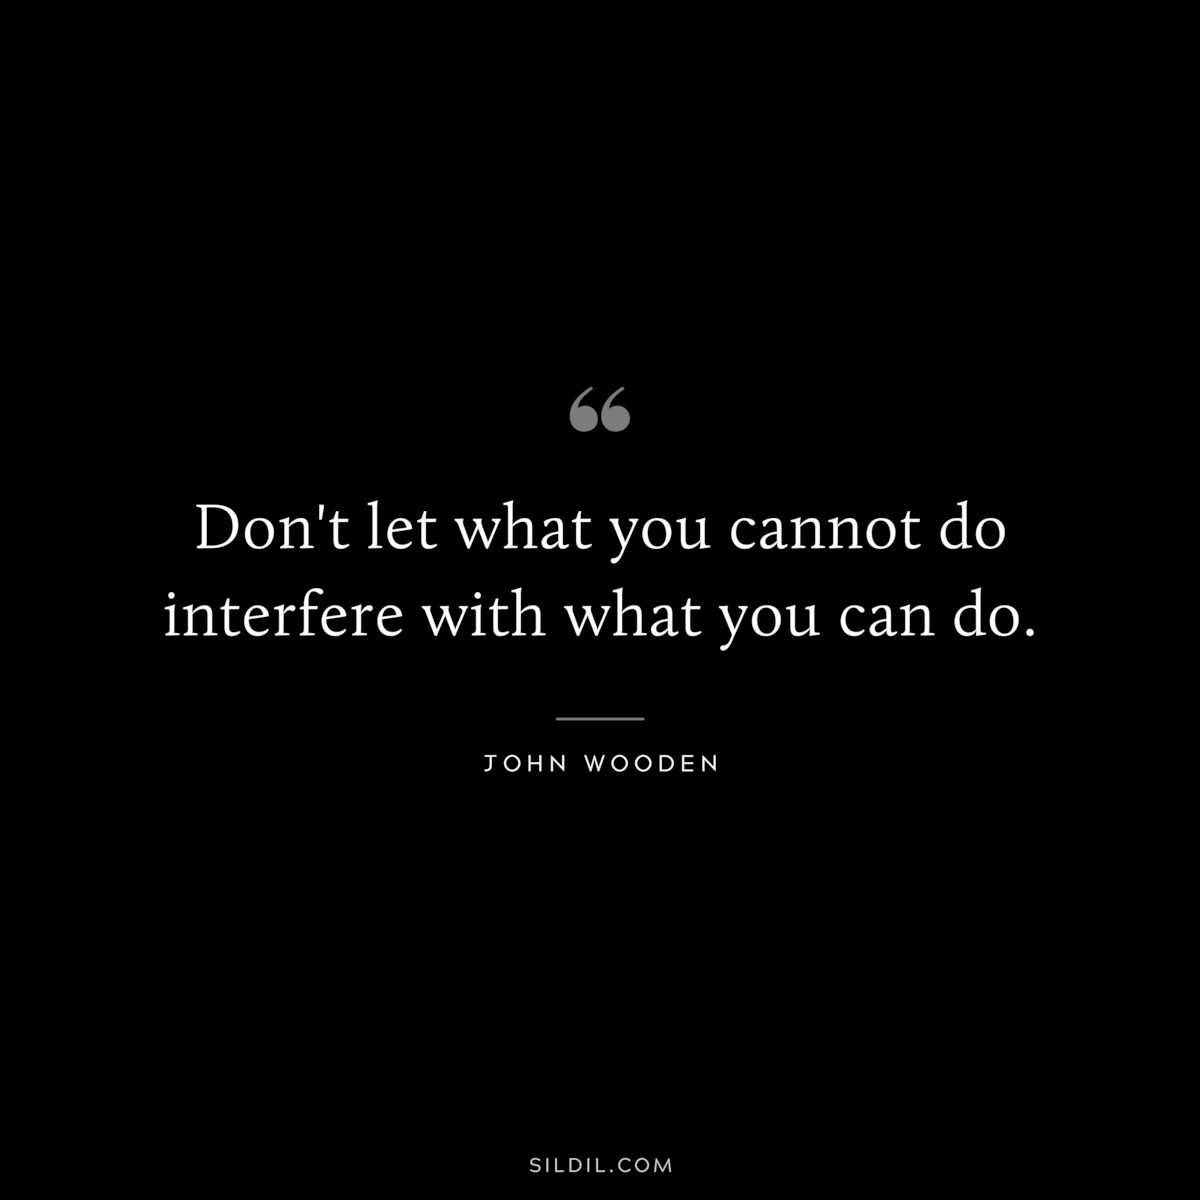 Don't let what you cannot do interfere with what you can do. ― John Wooden